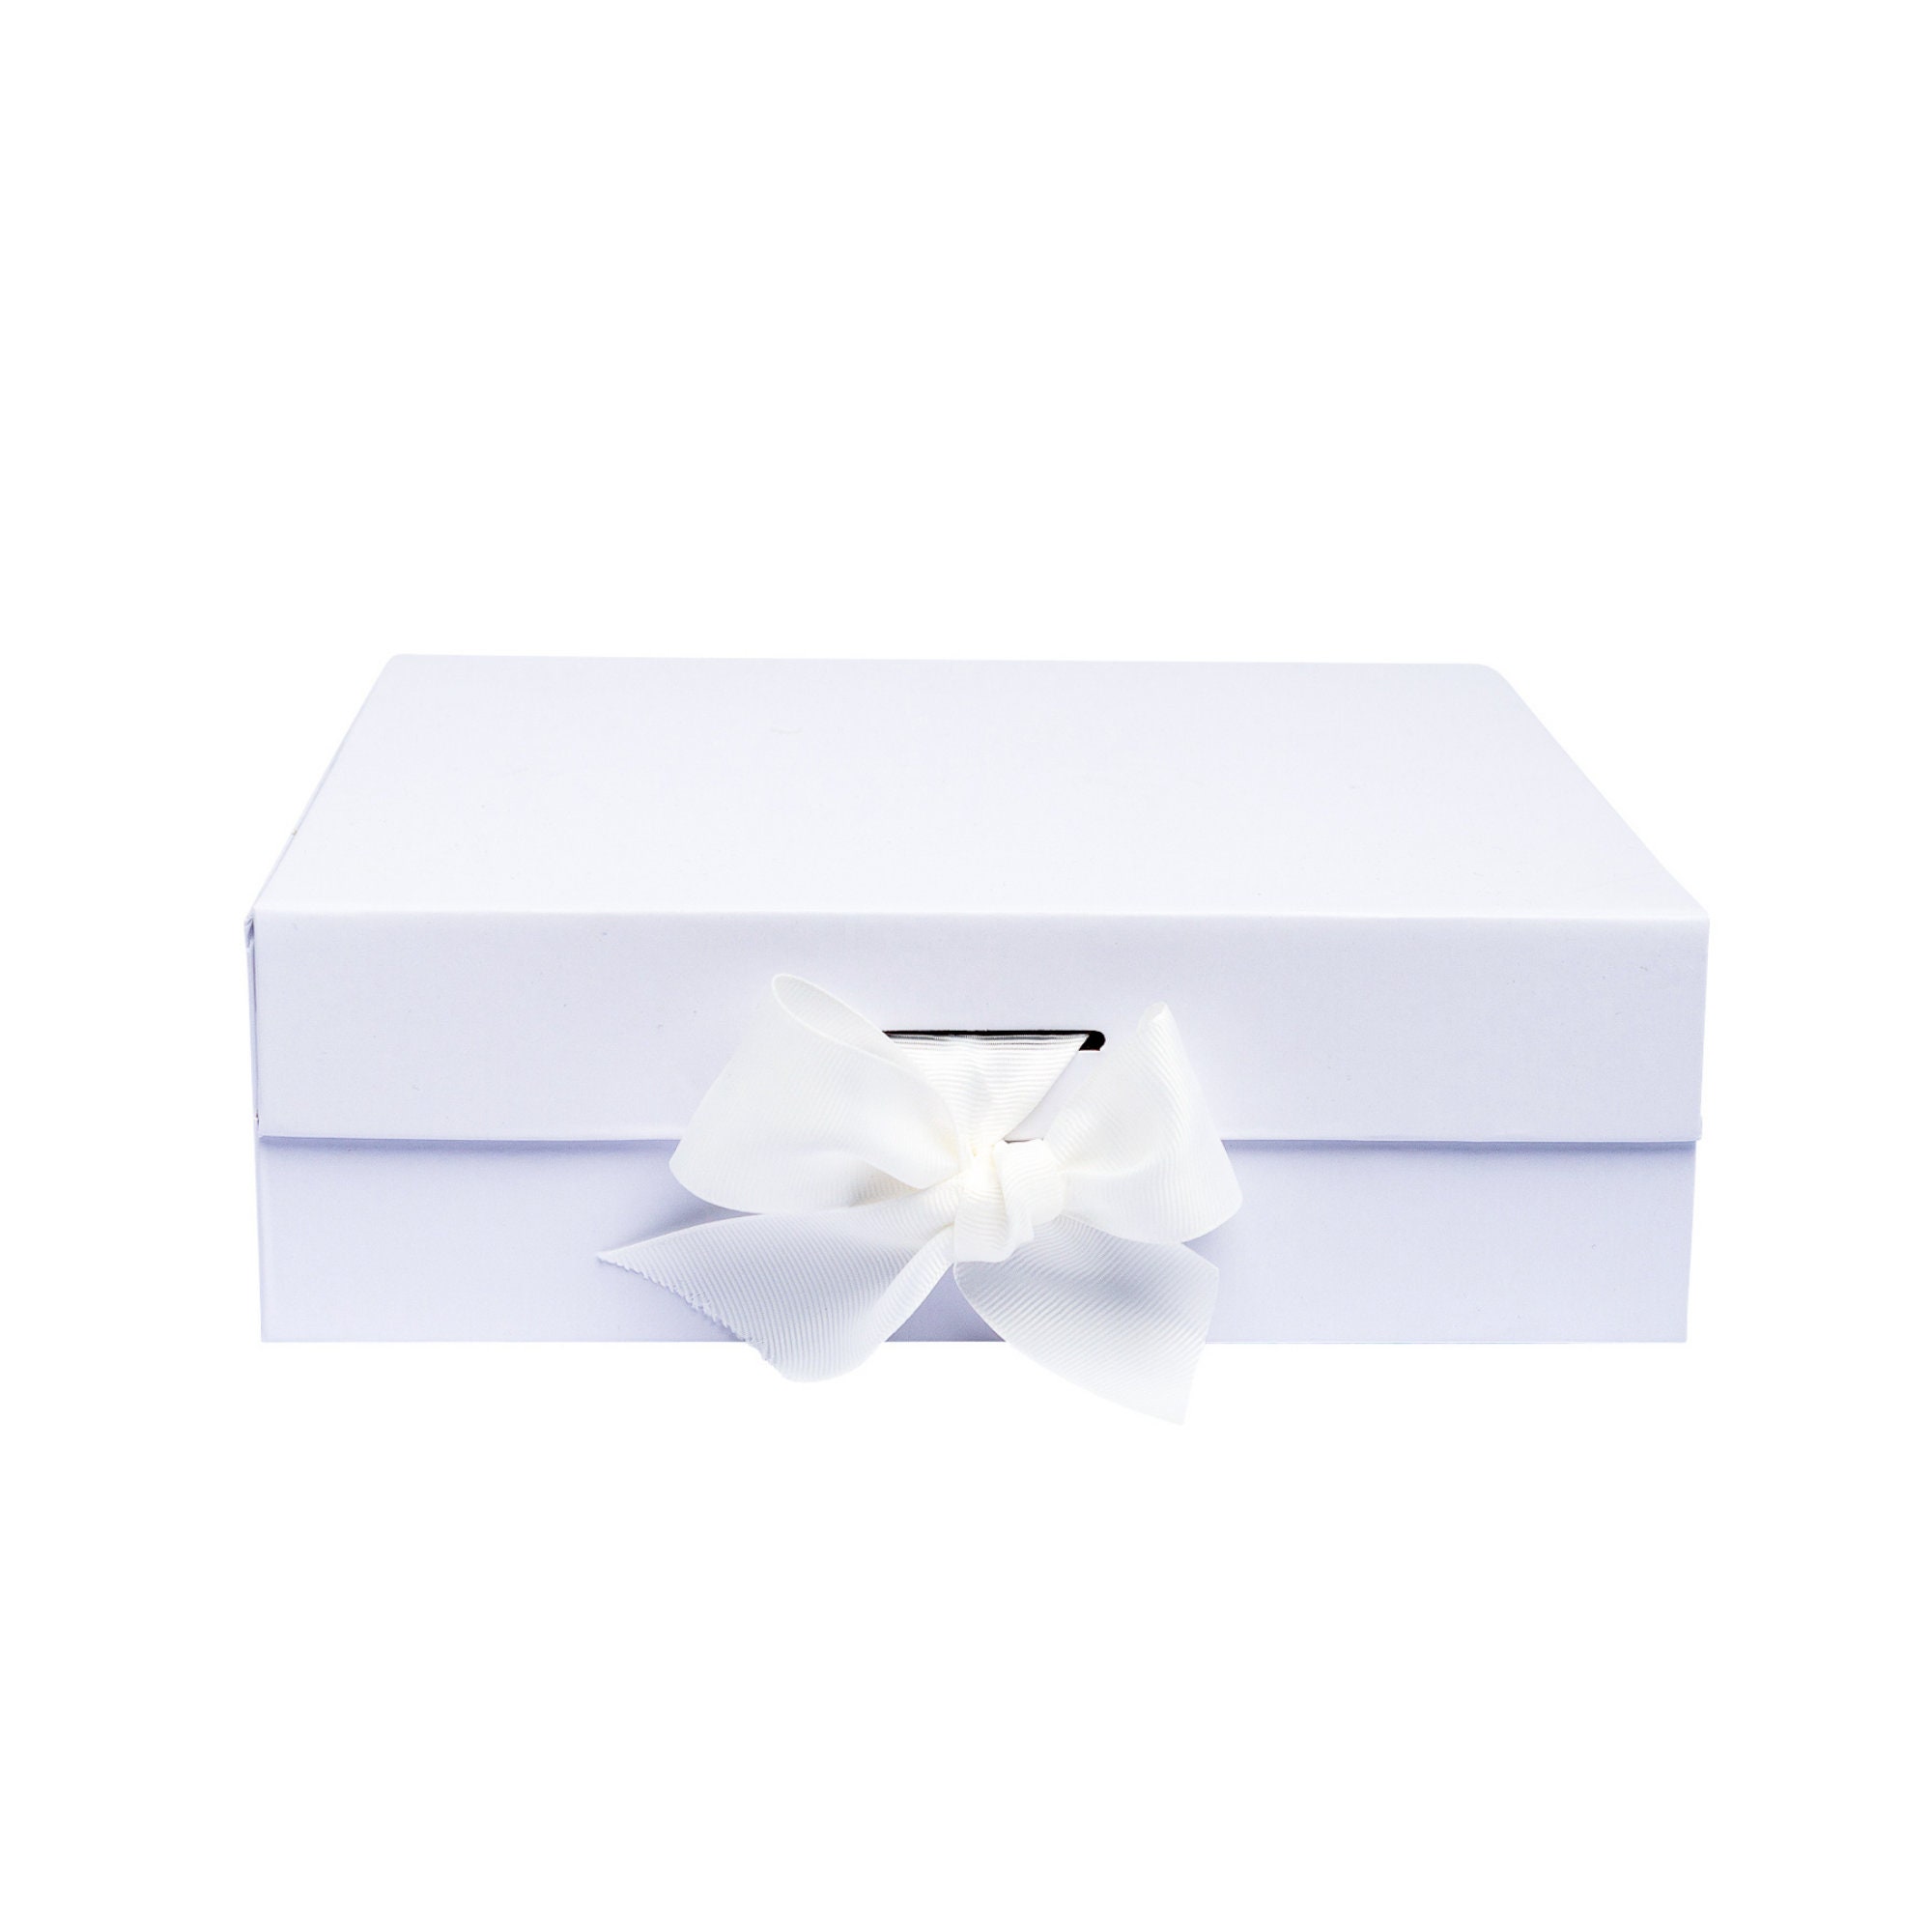 Gift Box White with Magnetic Closure Lid 10 X 6 X 3 Gift Box for  Presents,Luxury for Gift Packaging, Bridesmaid Gifts Box, Magnetic Gift Box  for